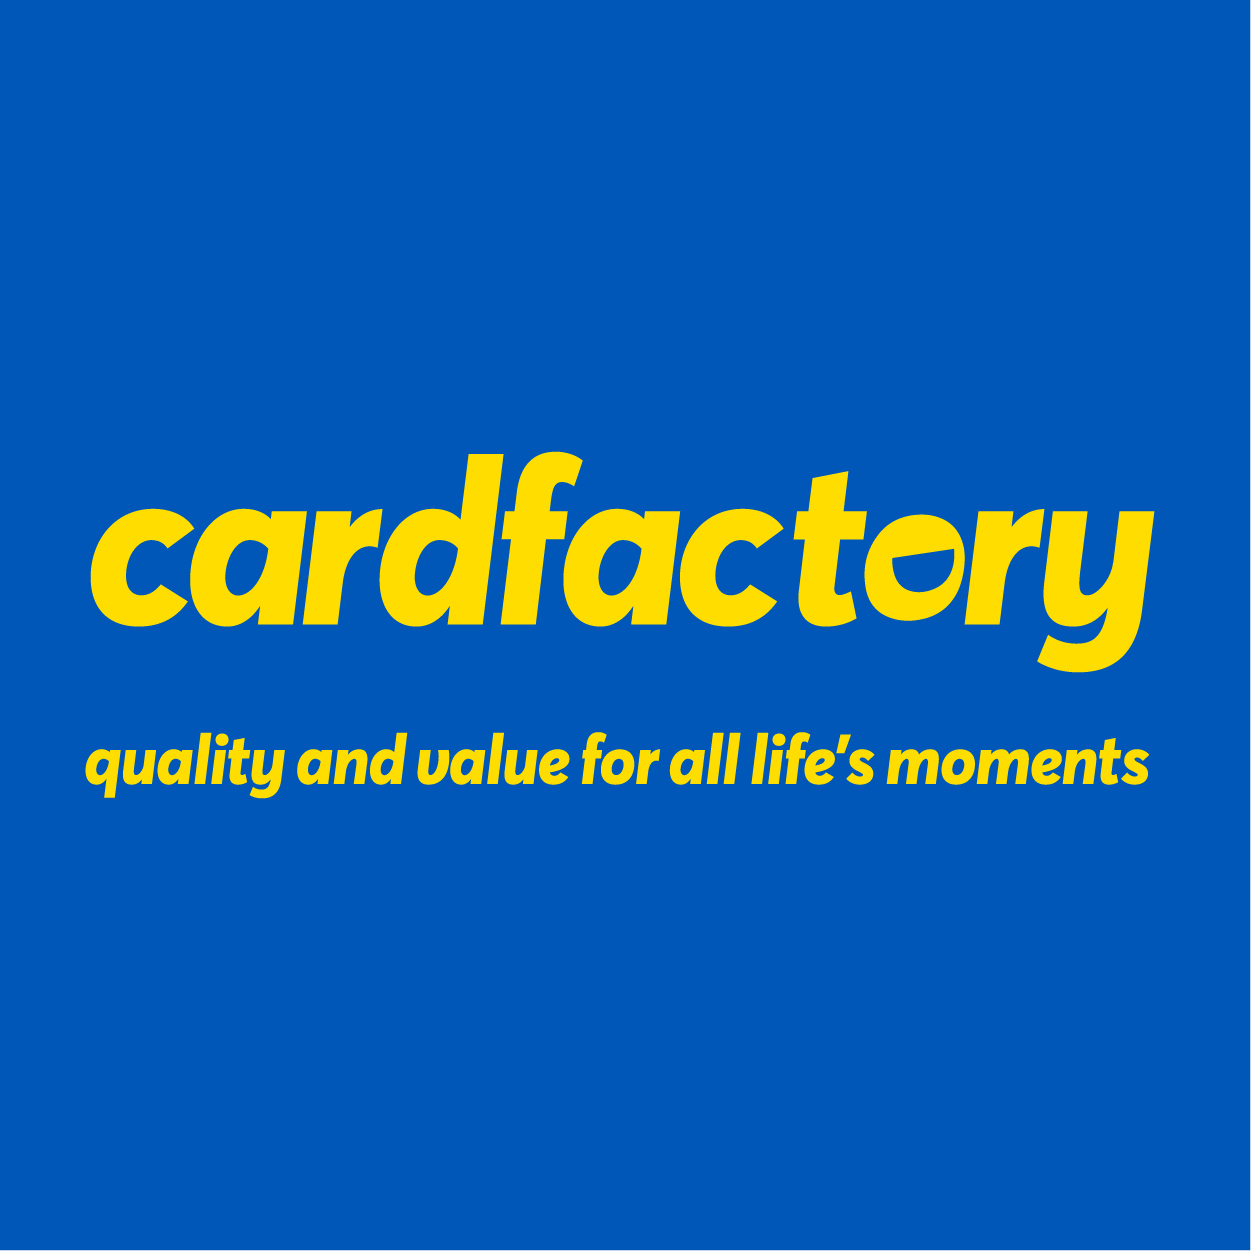 Card Factory Coupons & Promo Codes